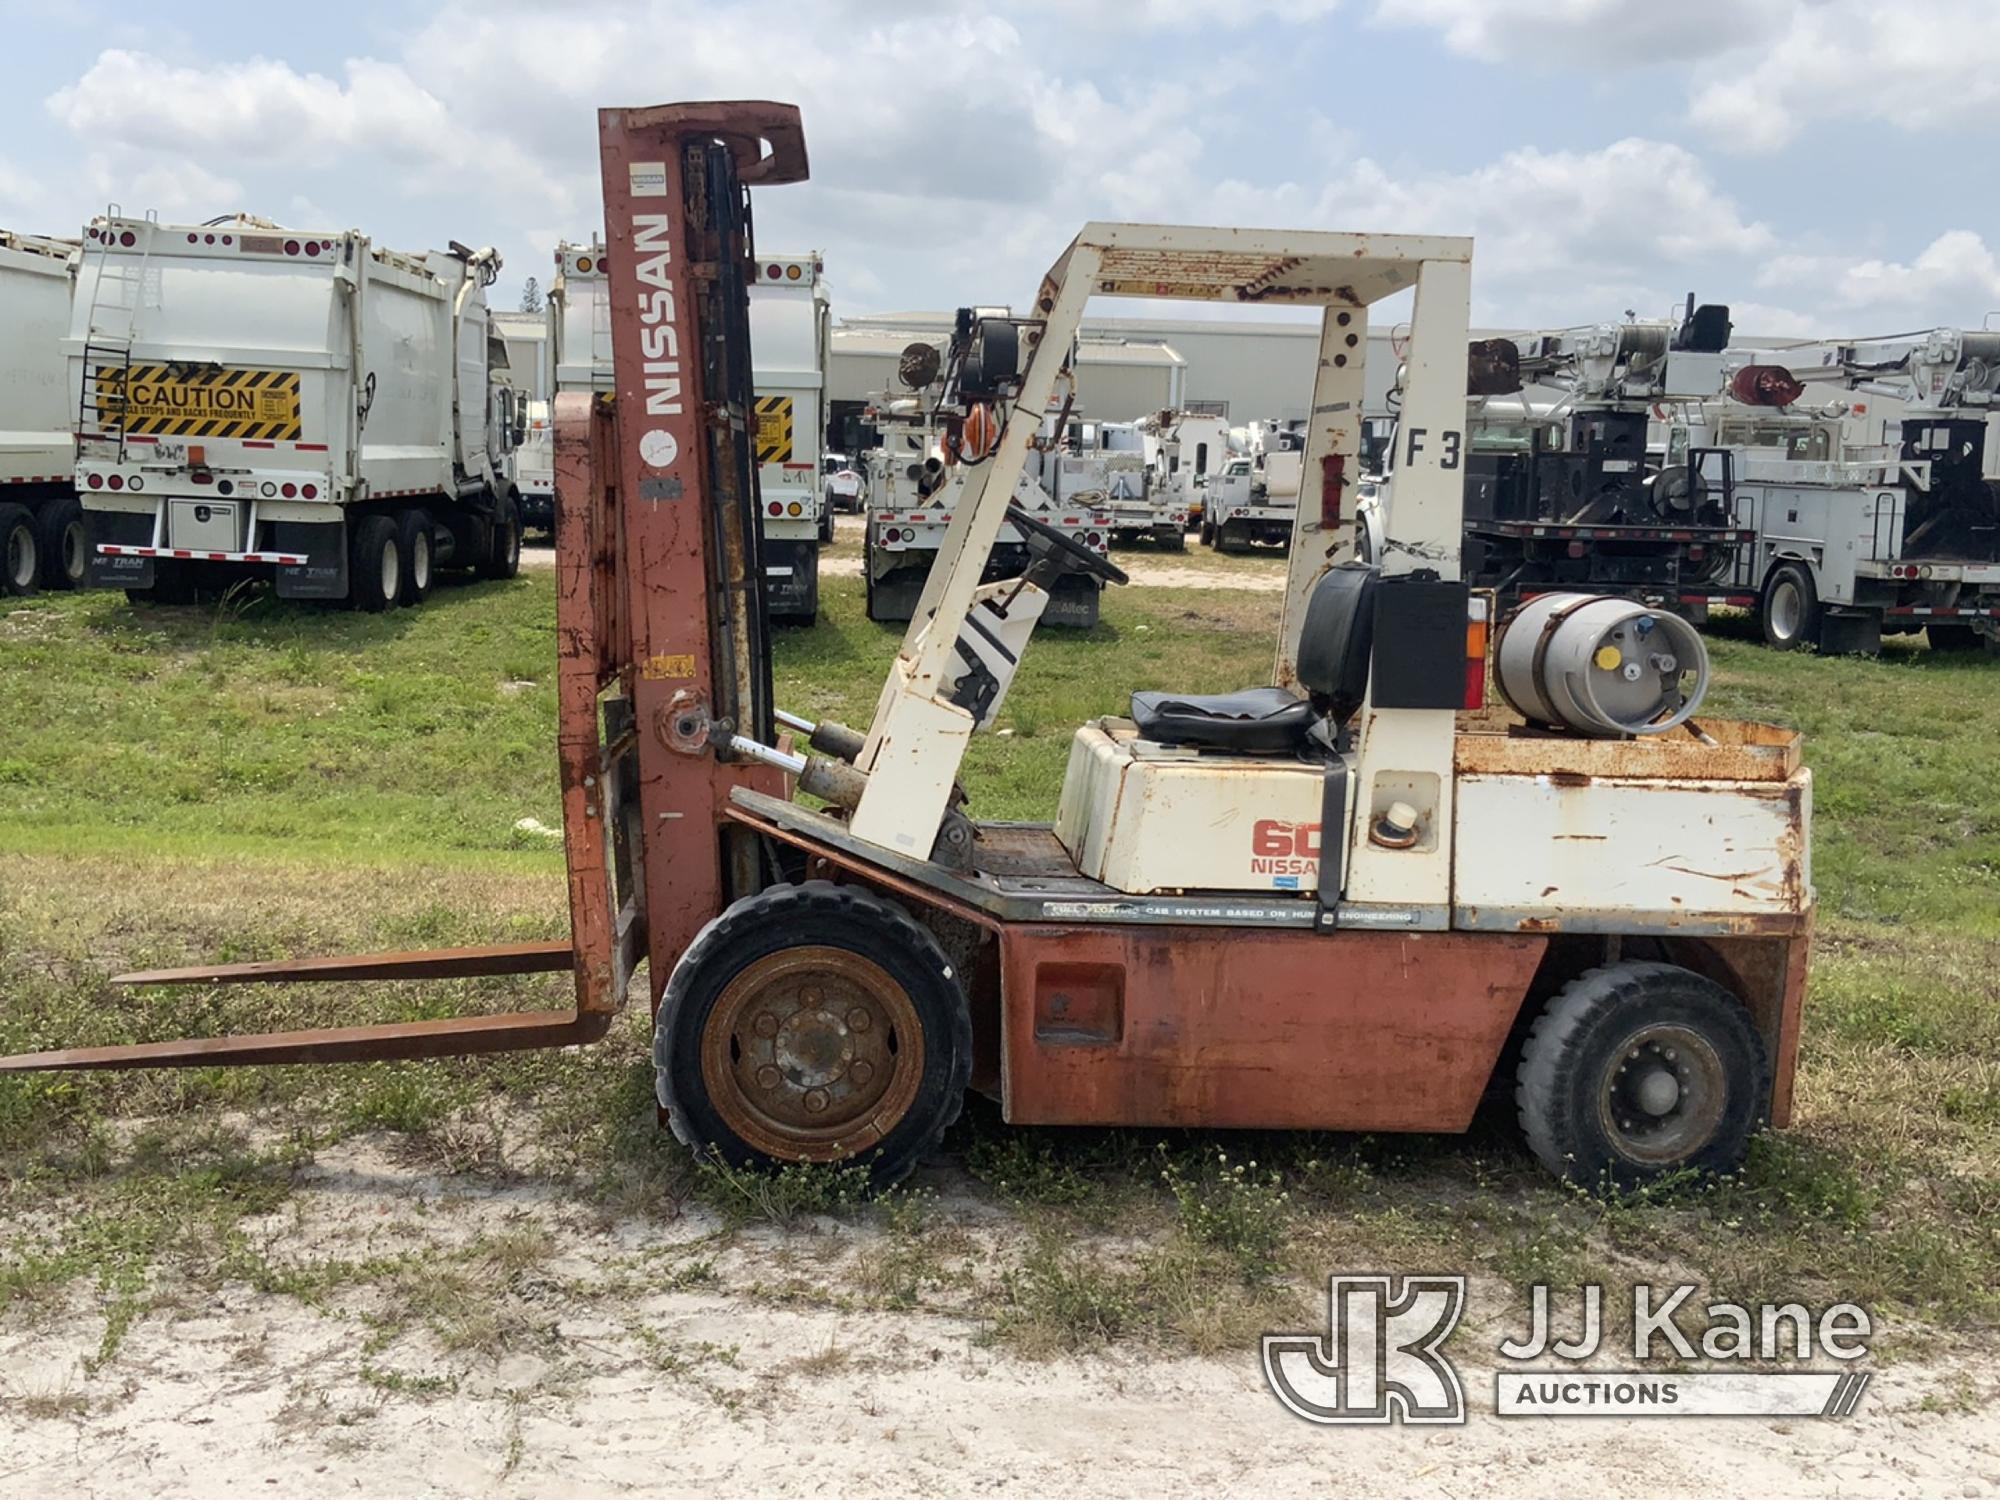 (Westlake, FL) 1990 Nissan M-C607 Pneumatic Tired Forklift Runs, Moves and Operates) (LPG Tank Inclu